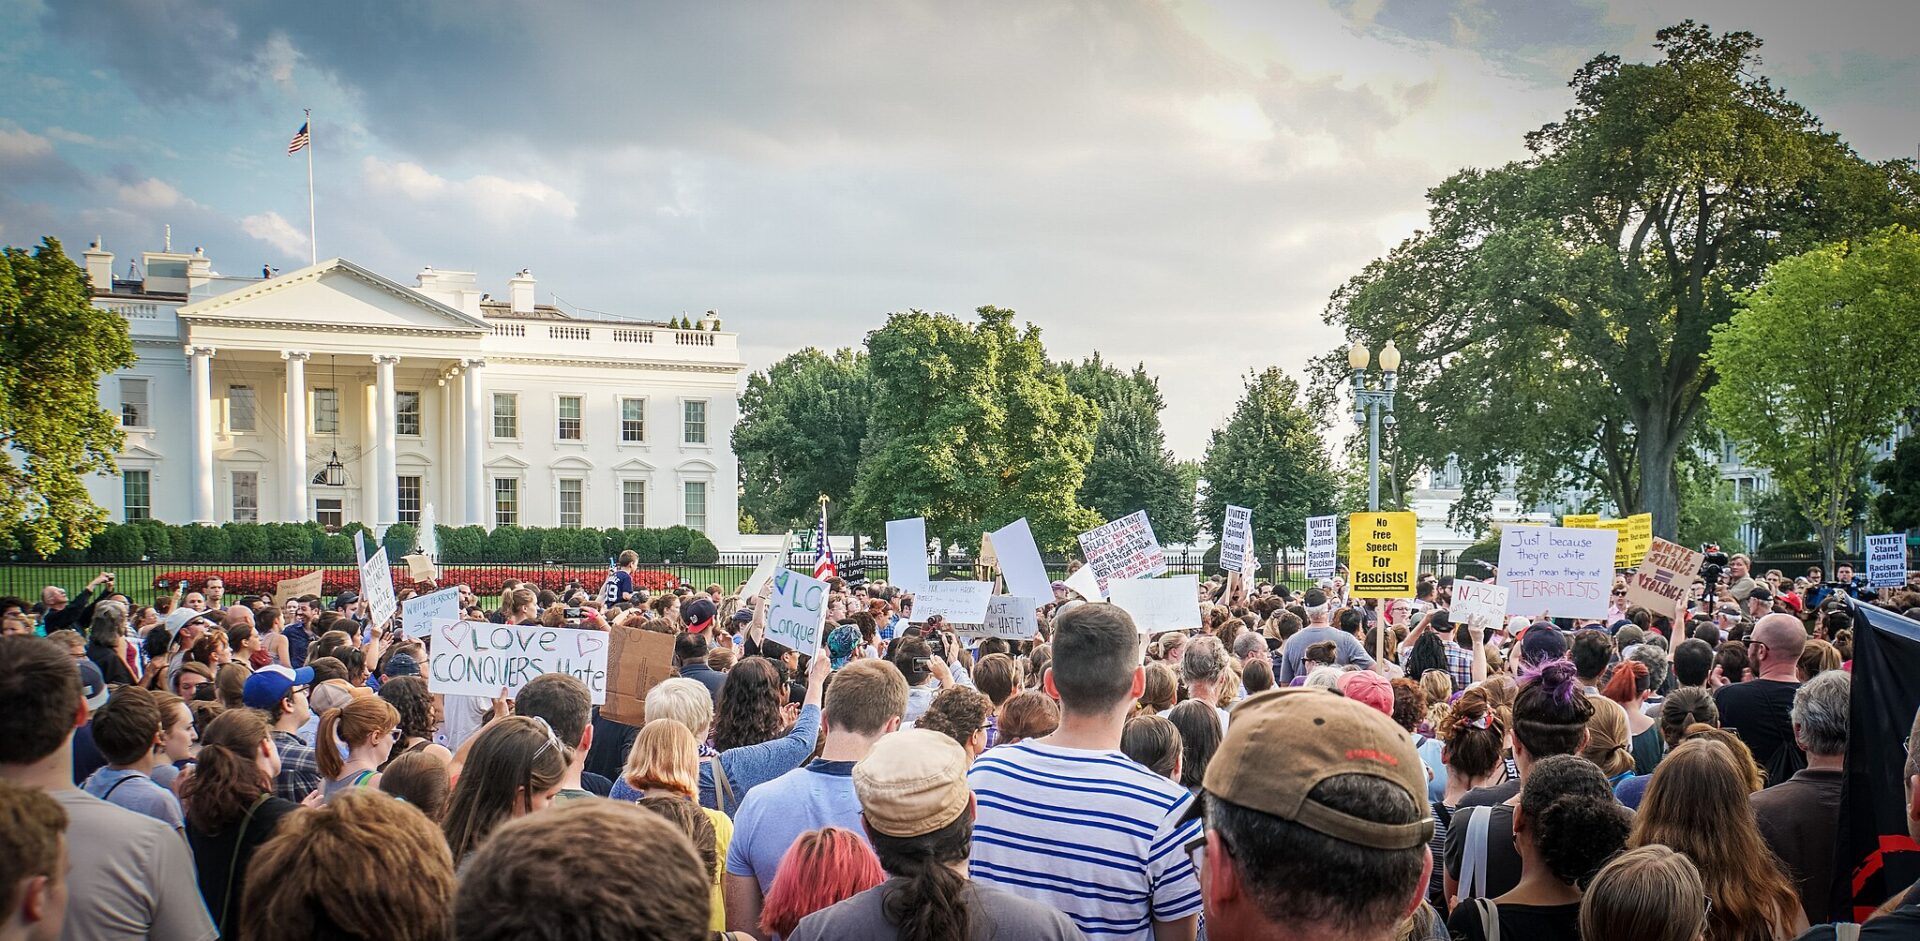 After the deadly "Unite the Right Rally" in Charlottesville in August 2017, protesters gathered for a vigil in Washington DC (Ted Eytan via Wikimedia Commons)